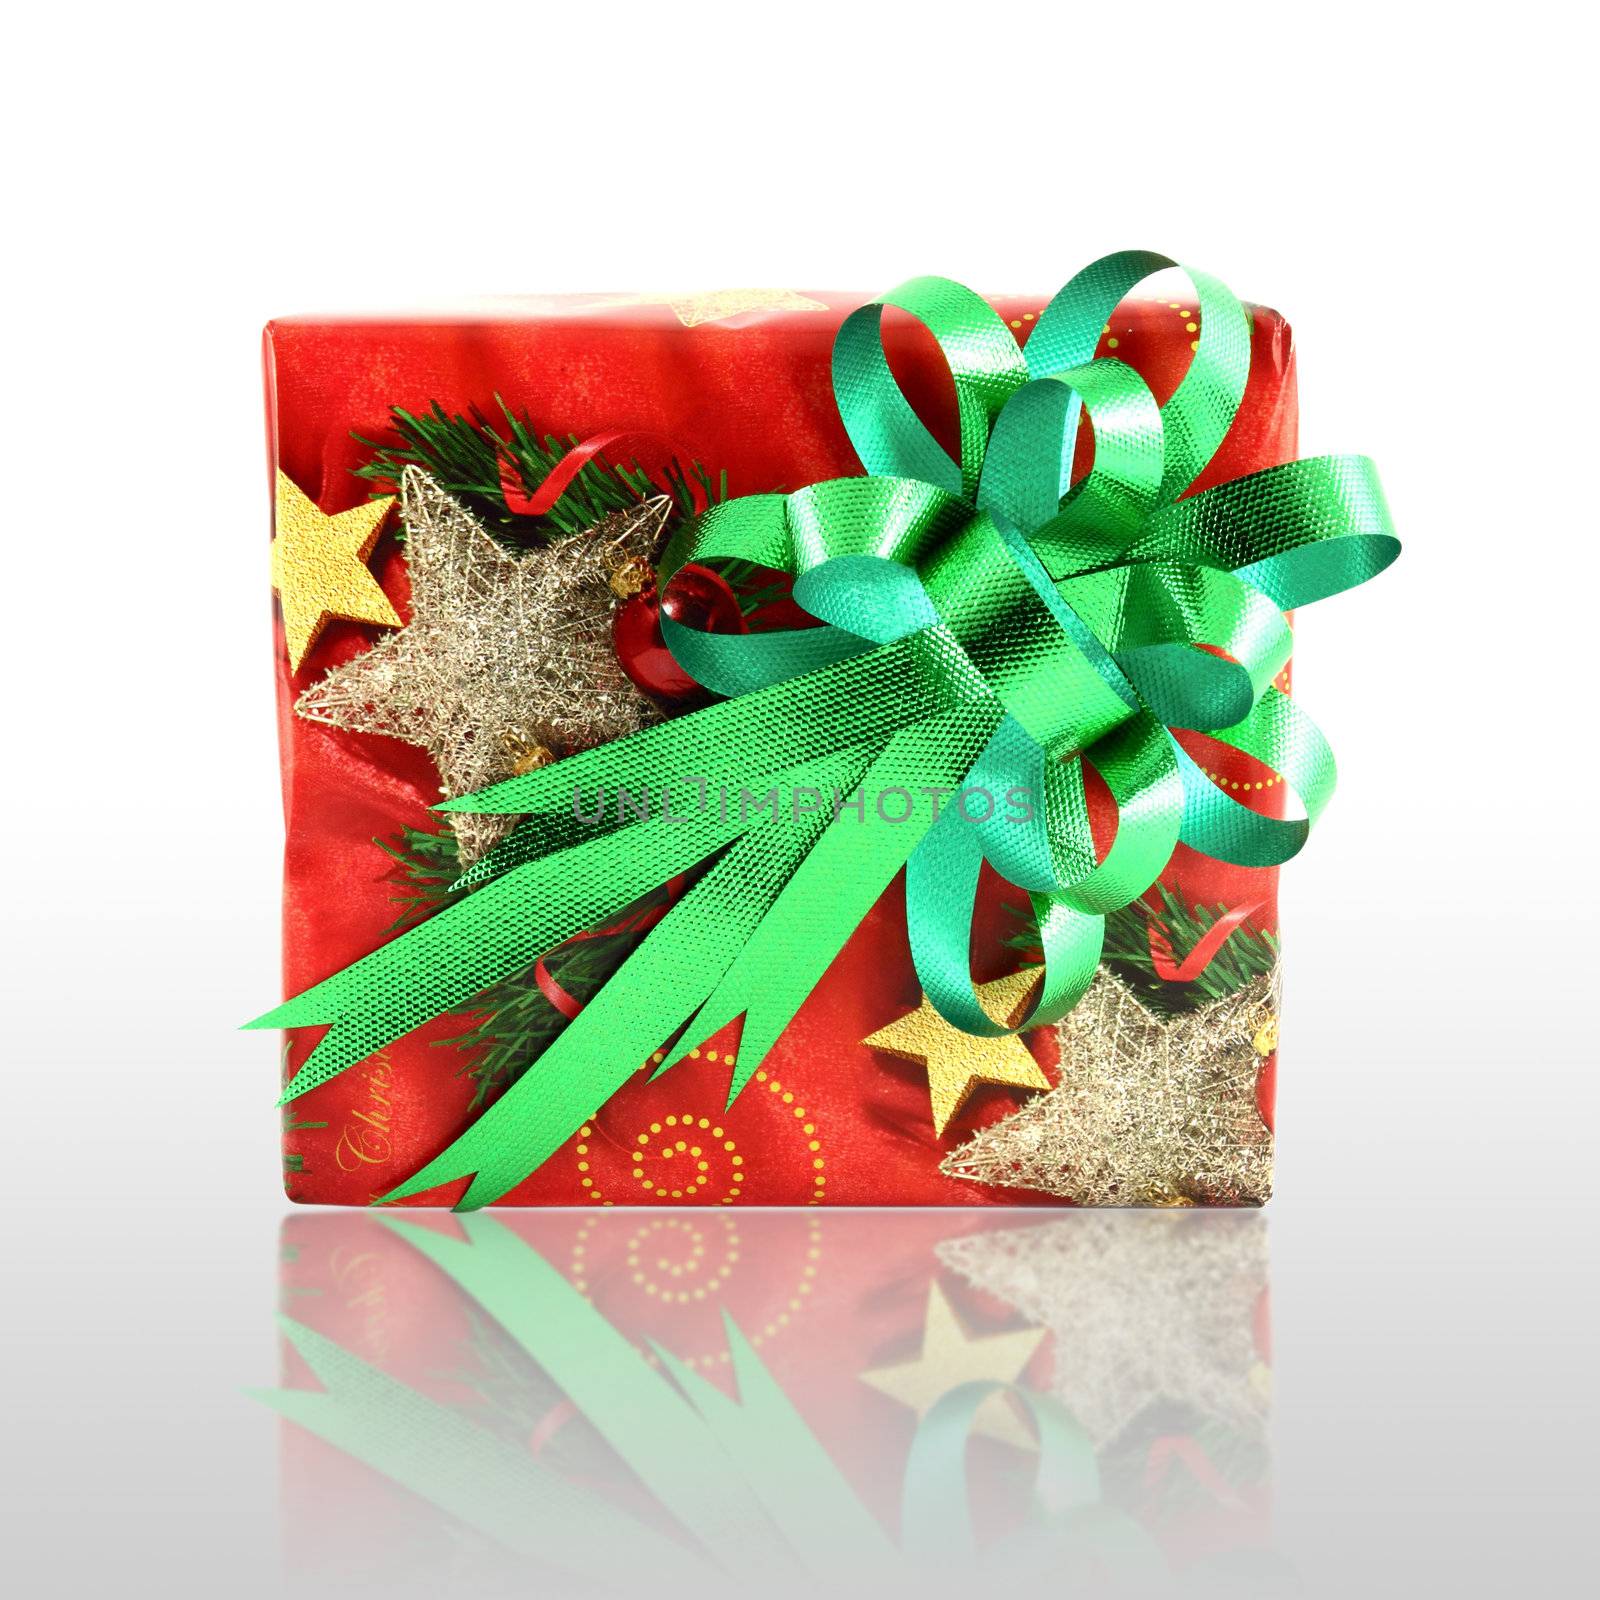 Christmas gift box with green bow by geargodz